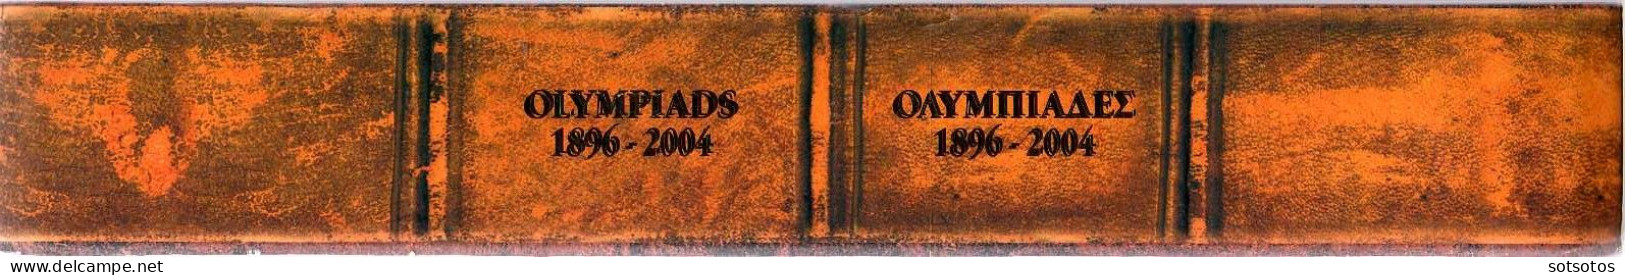 Athens Olympiads 1896-2004 - Livres